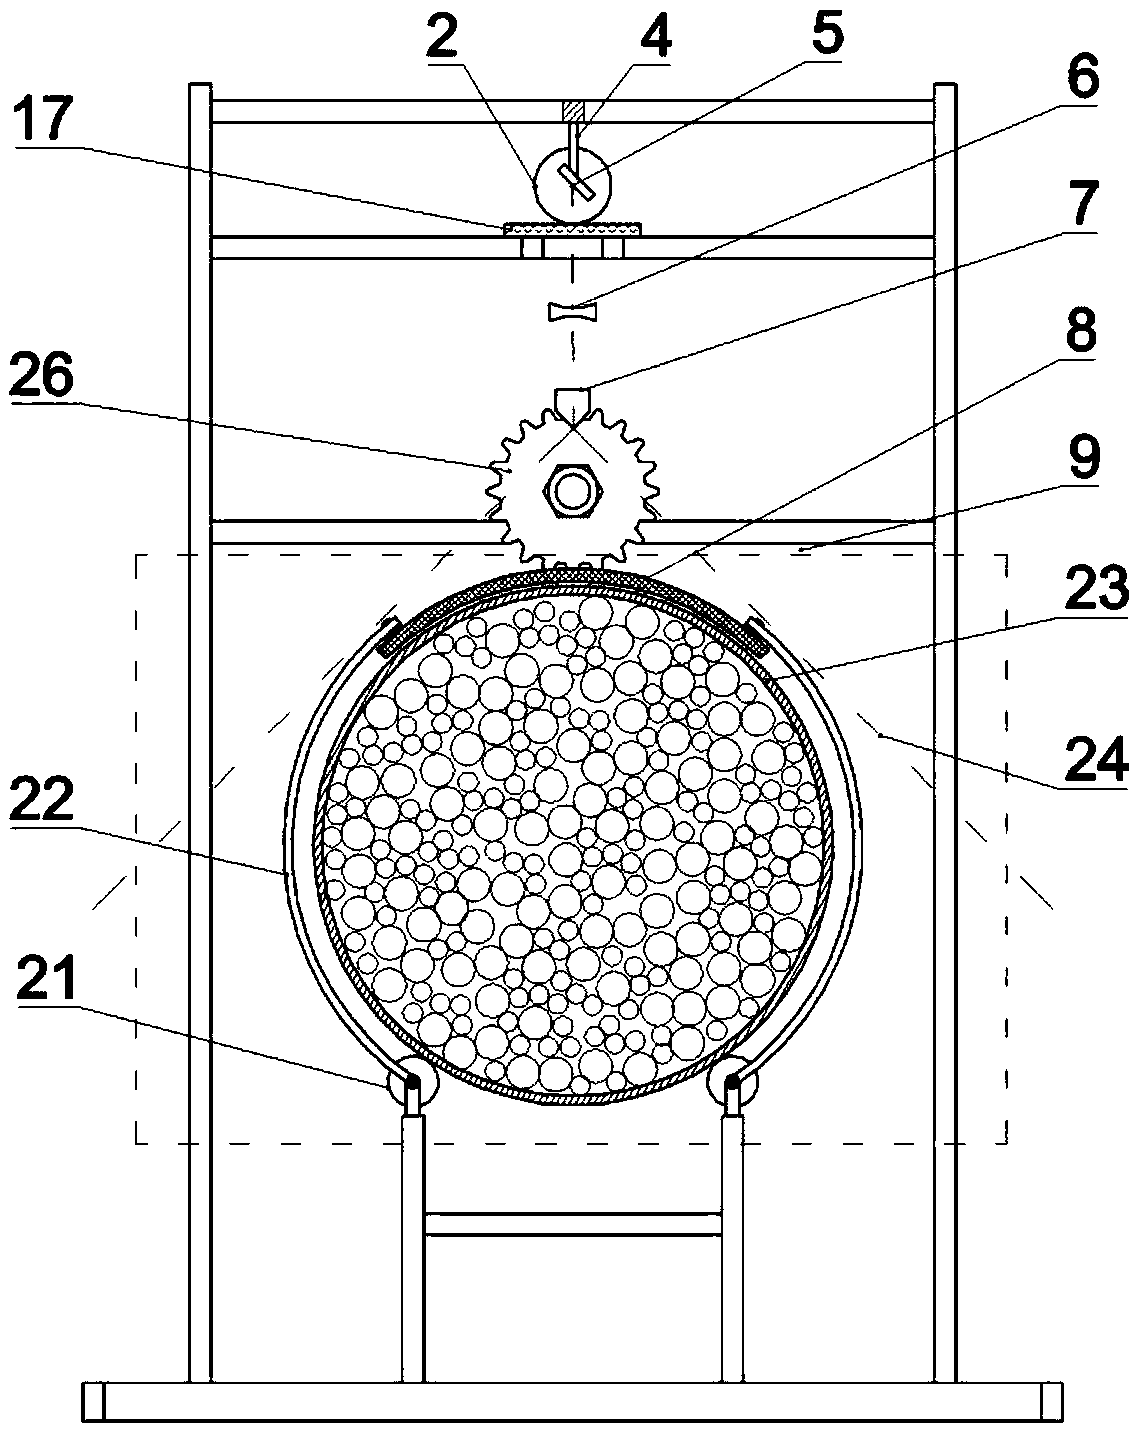 Cylinder type separation test device for non-uniform bed load particles and test method of device